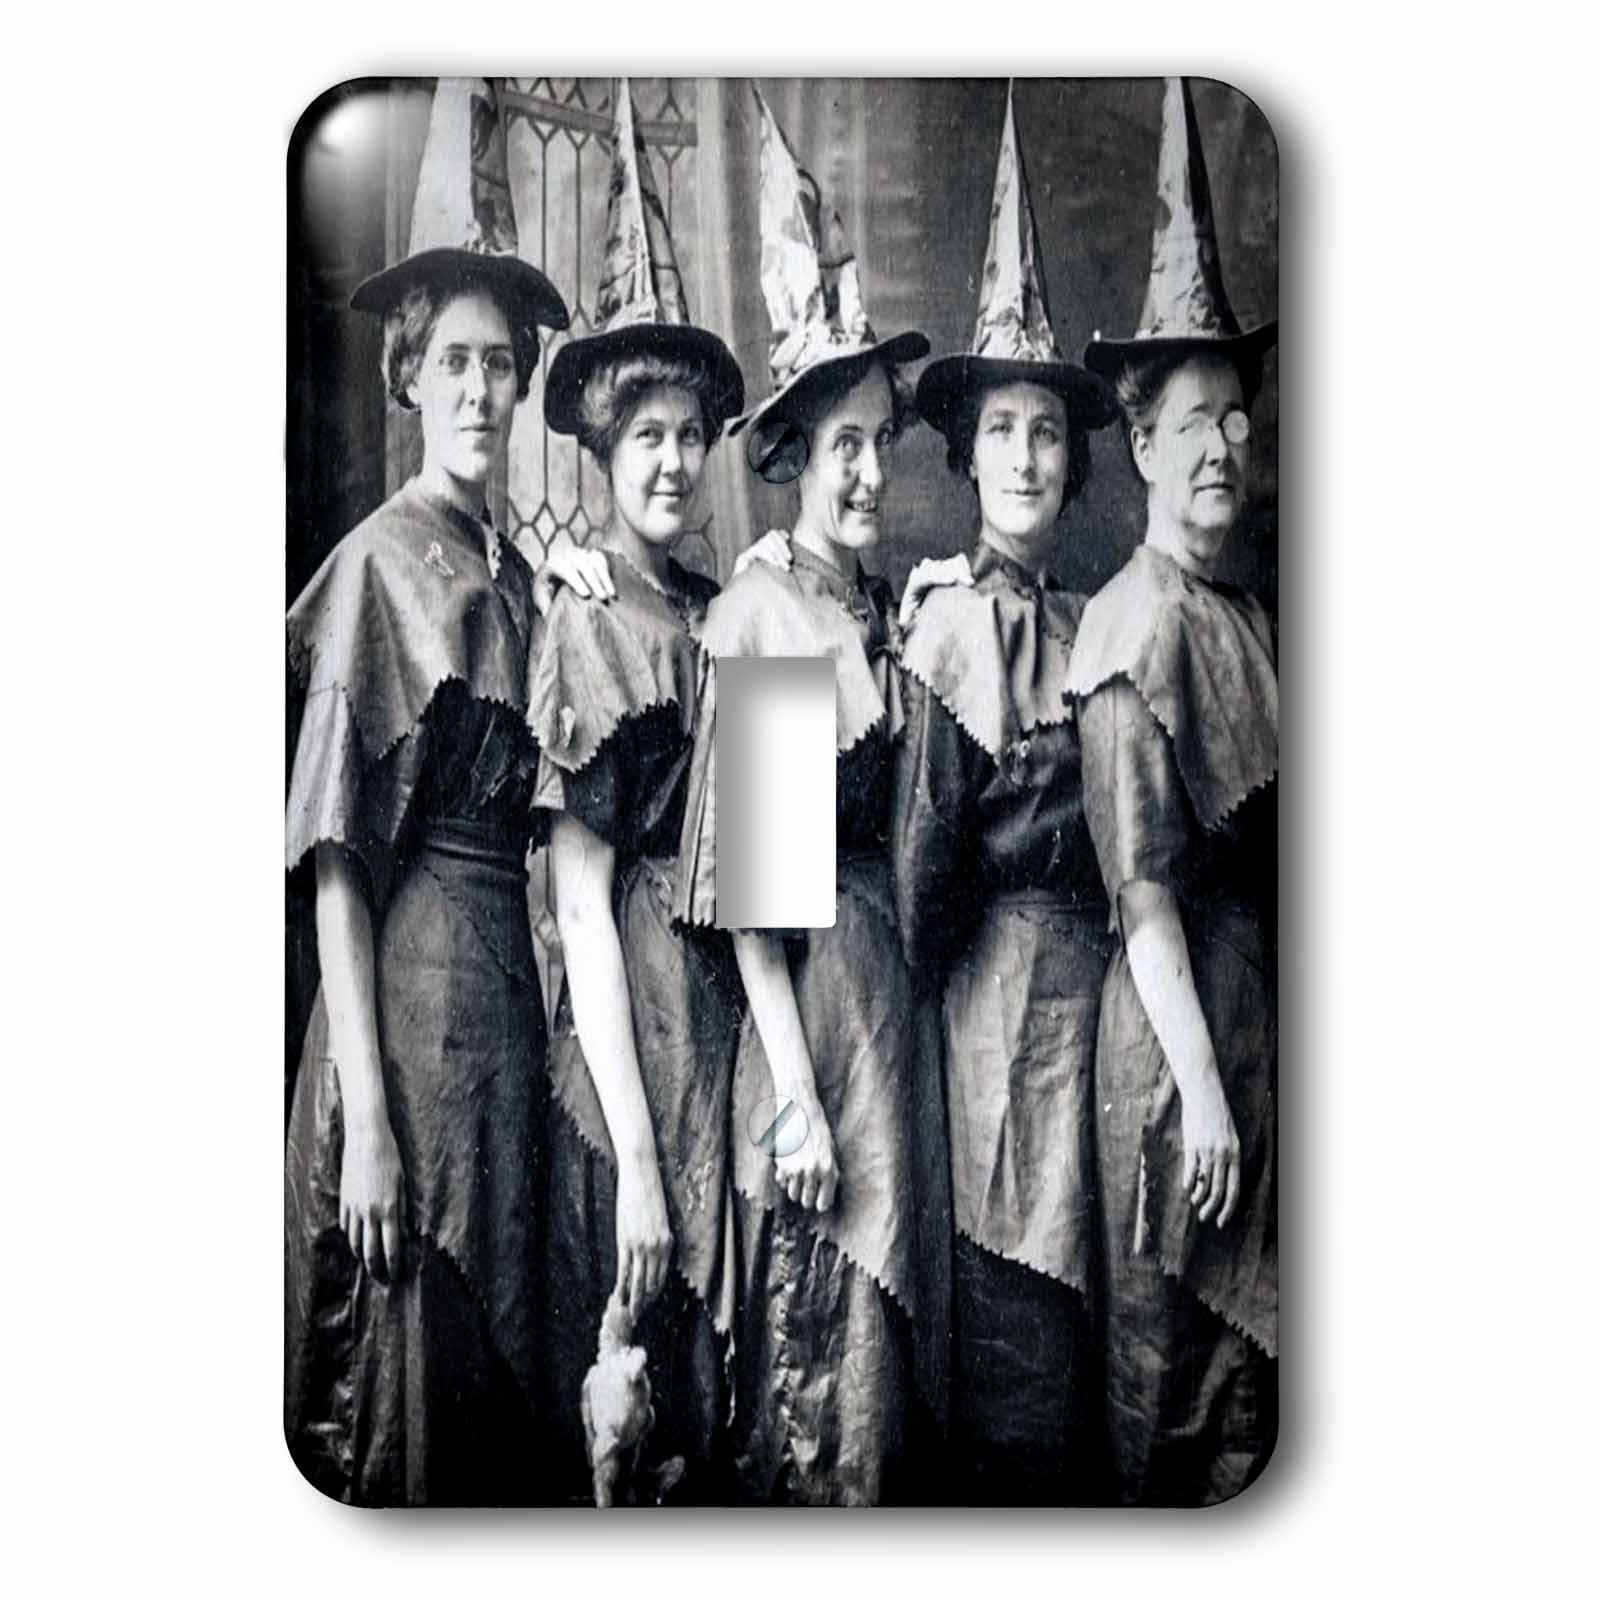 3drose lsp_269792_1 vintage halloween witches coven early 1900s scary toggle switch, multicolor